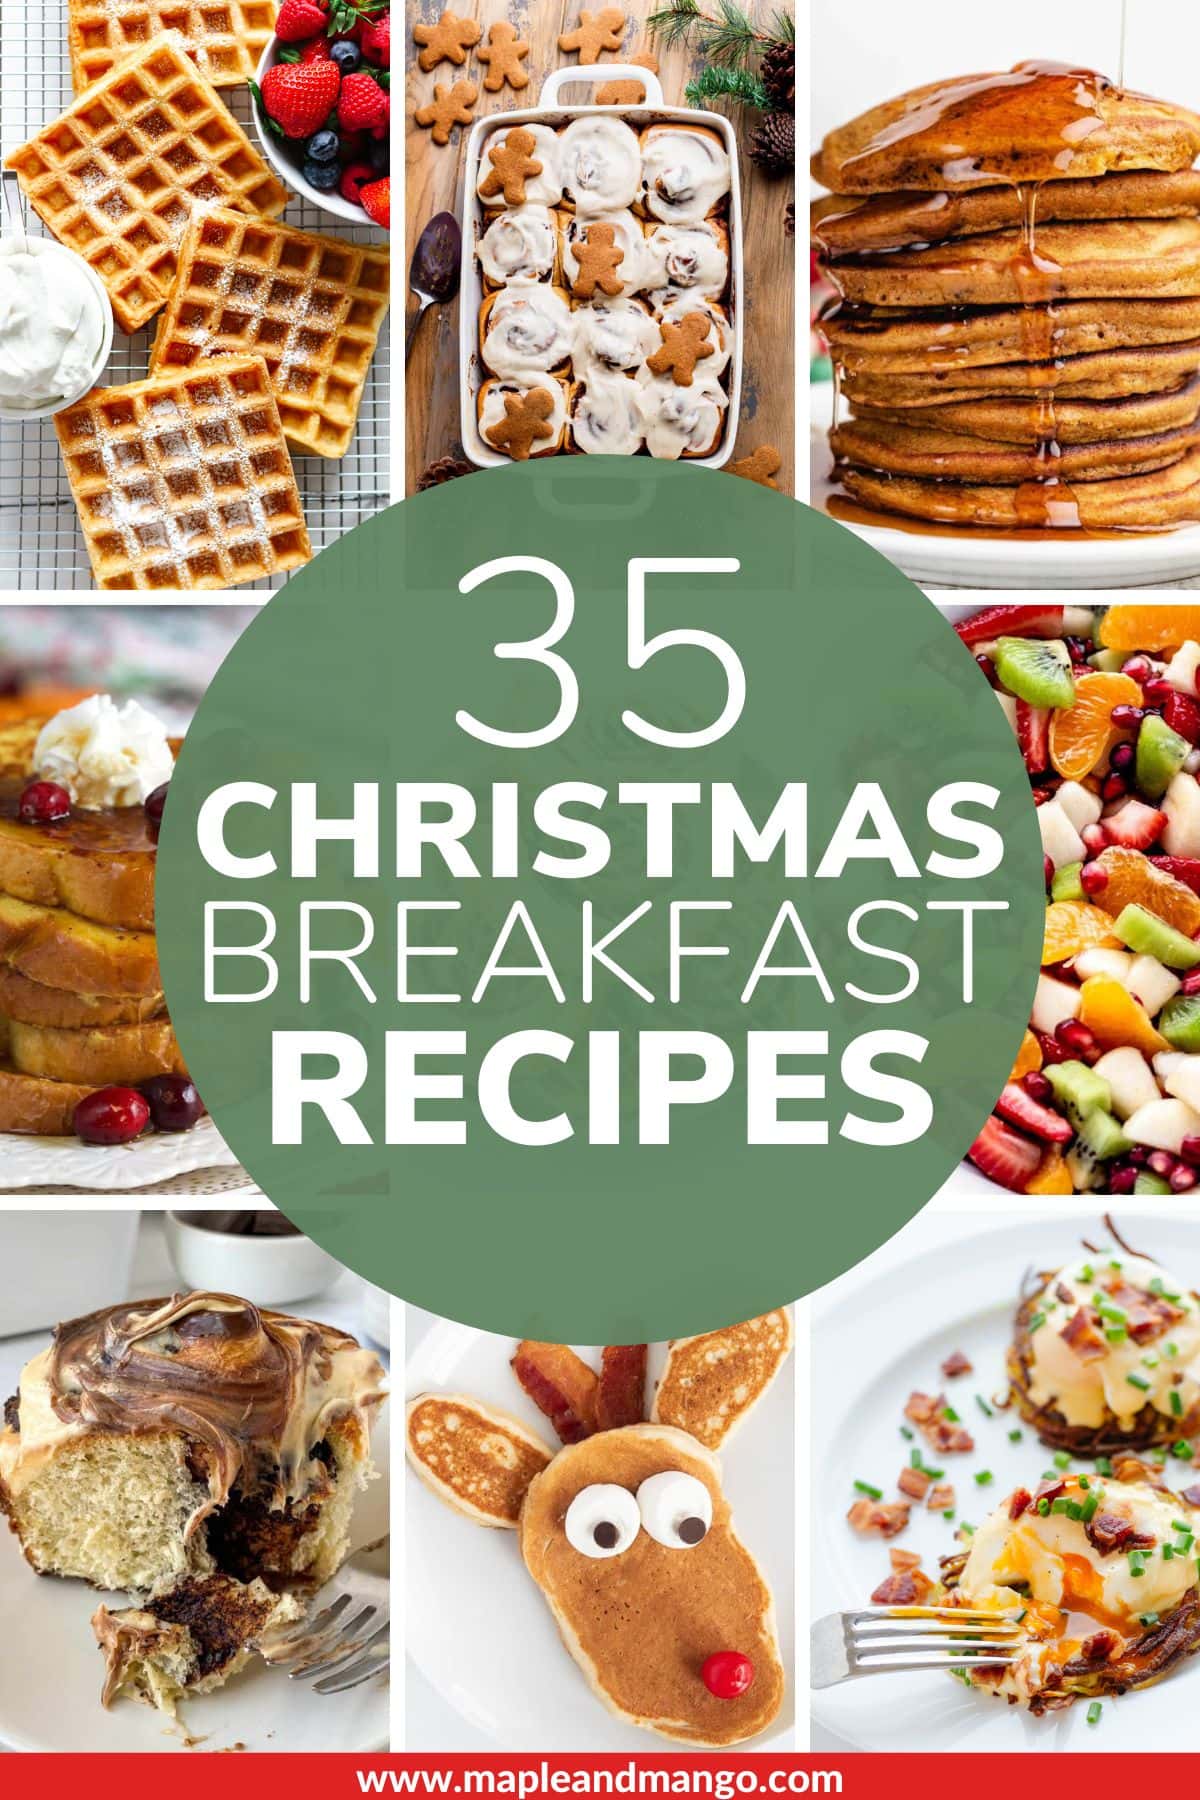 Photo collage of recipes to serve Christmas morning with text overlay that reads "35 Christmas Breakfast Recipes".